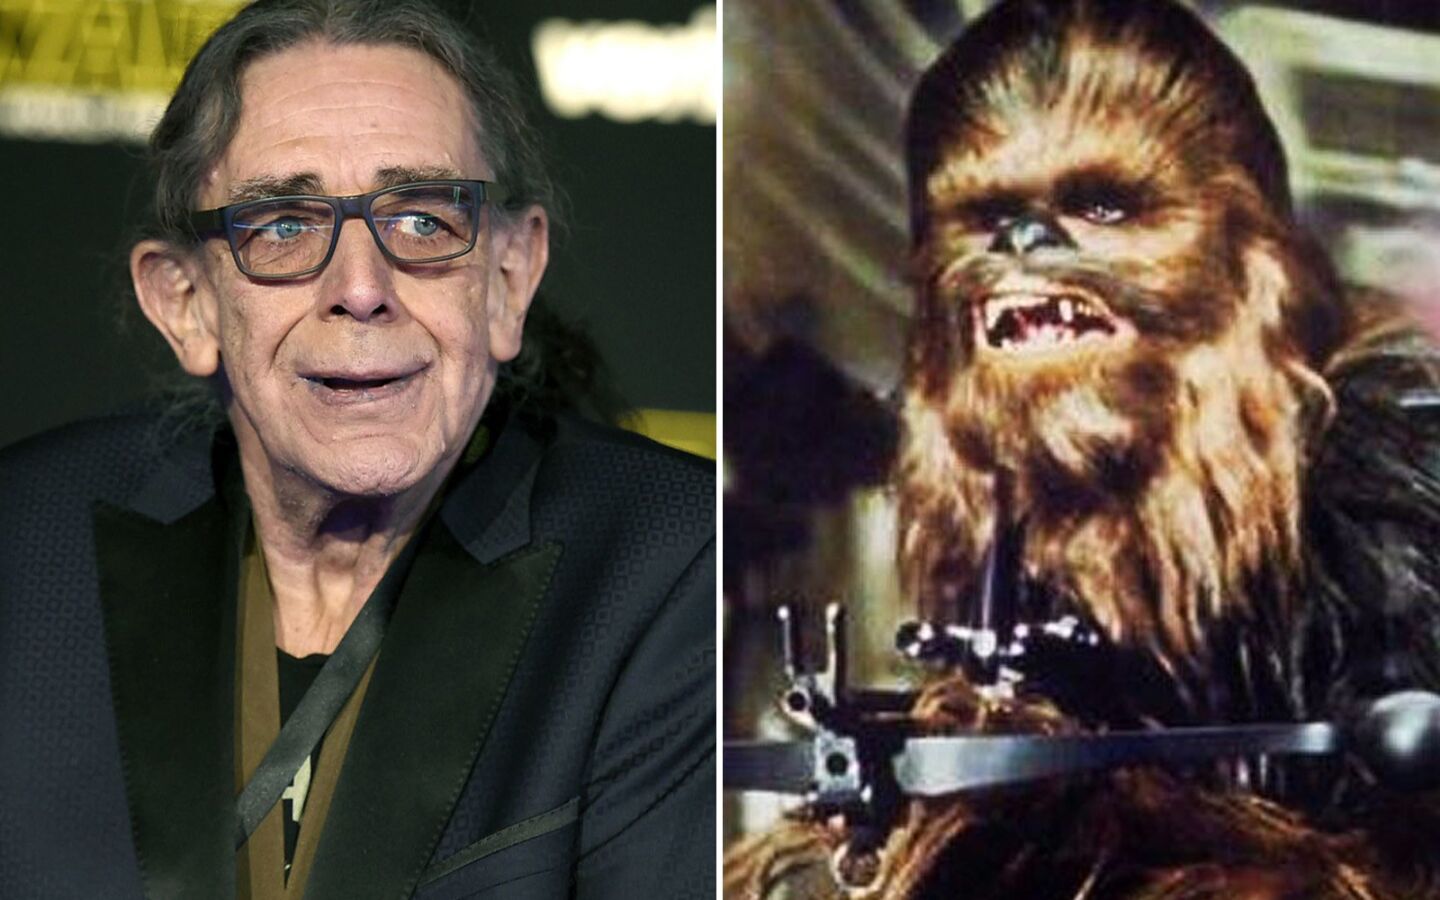 Peter Mayhew played the Wookiee warrior Chewbacca in the original “Star Wars” trilogy. Standing at 7 feet 3, the British actor brought the character to life physically, whether battling Stormtroopers alongside Han Solo or playing chess against R2-D2. He was 74.